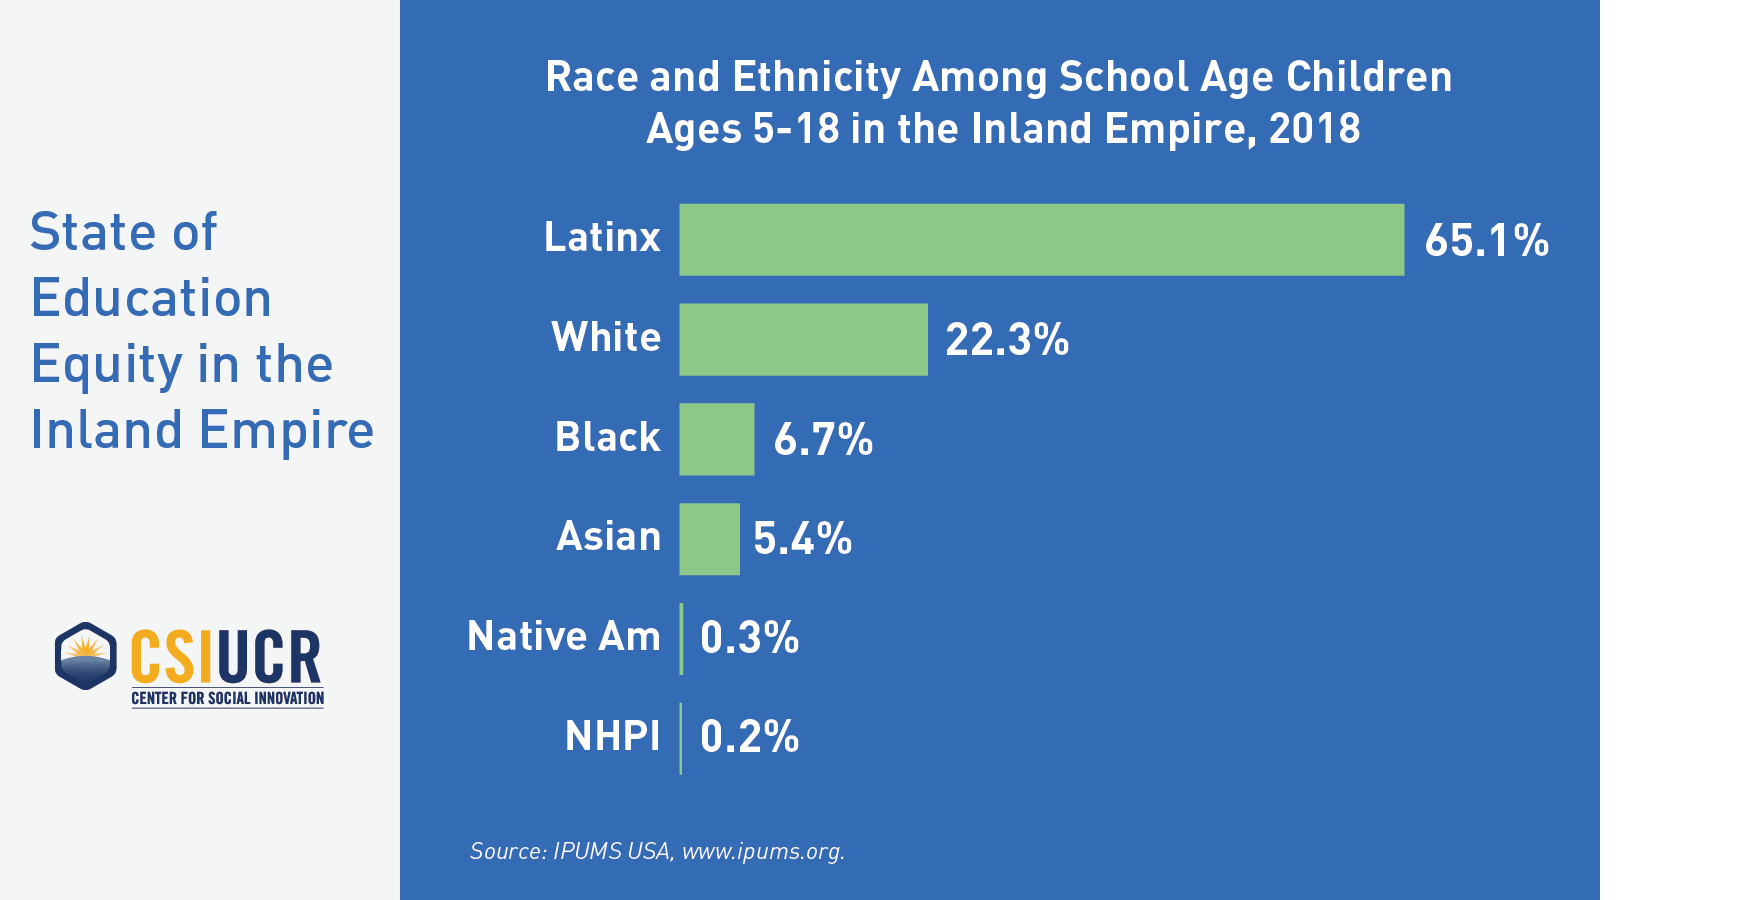 Race and Ethnicity Among School Age Children Ages 5-18 in the IE, 2018